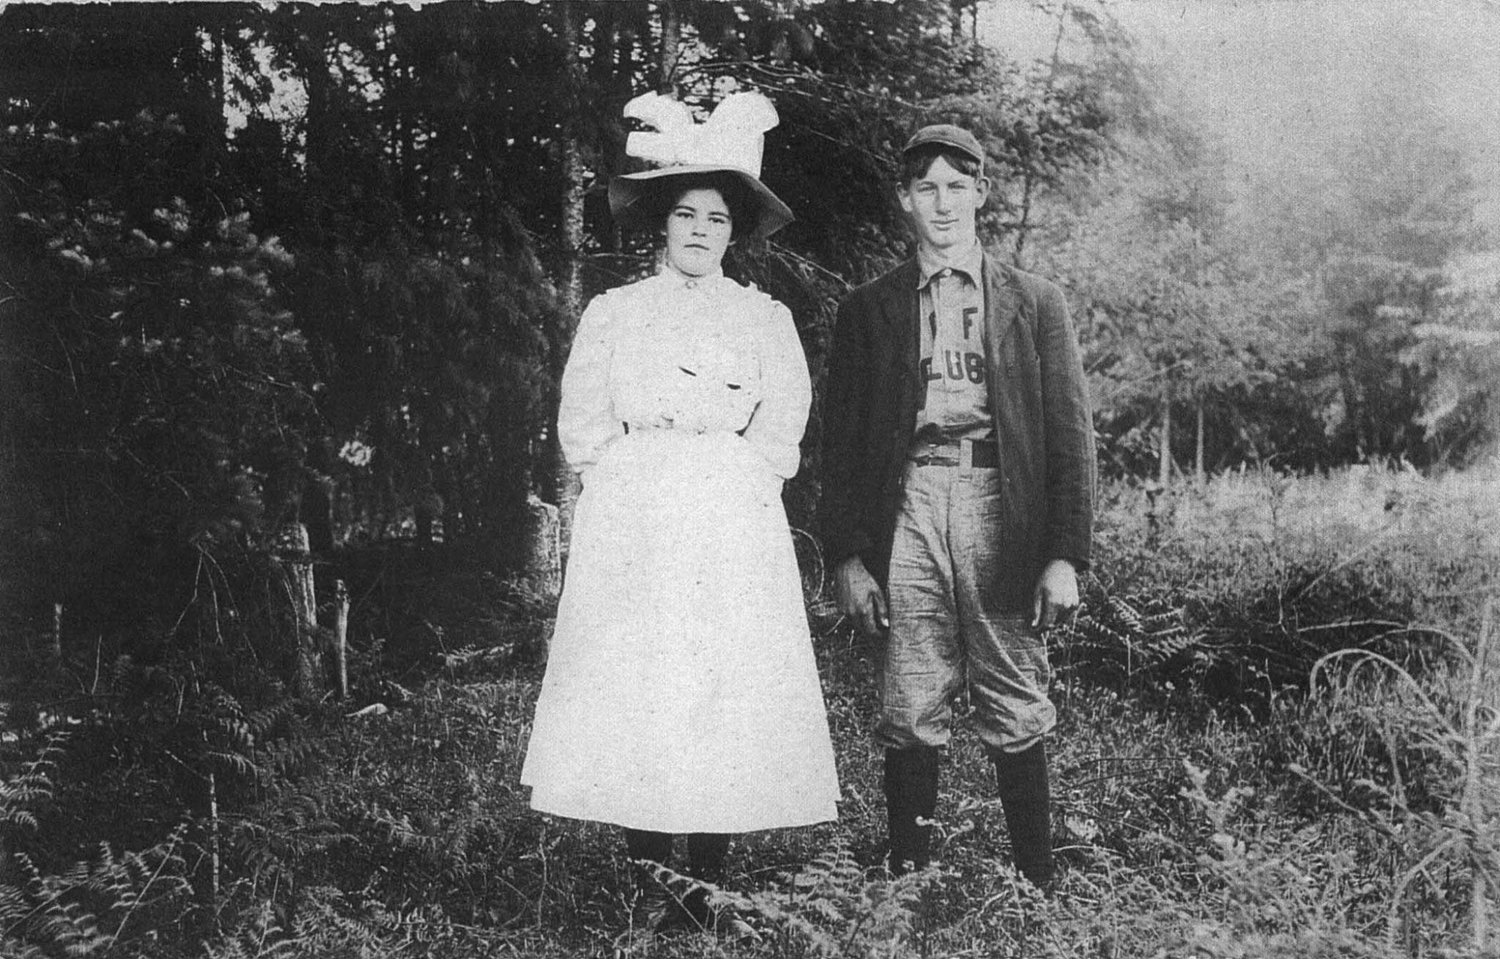 This 1916 photo is of Doris Malantha Owen Booth and Donnie W. Booth. It was taken sometime before the couple’s 1917 wedding date. She’s dressed smartly with a light colored dress and a huge bow on her hat. He’s dressed for baseball. Donnie owned and operated a garage in Vader and lived in Vader with his wife, Doris, and their four children — Gerald, Harold, Marjorie and Myrtle.